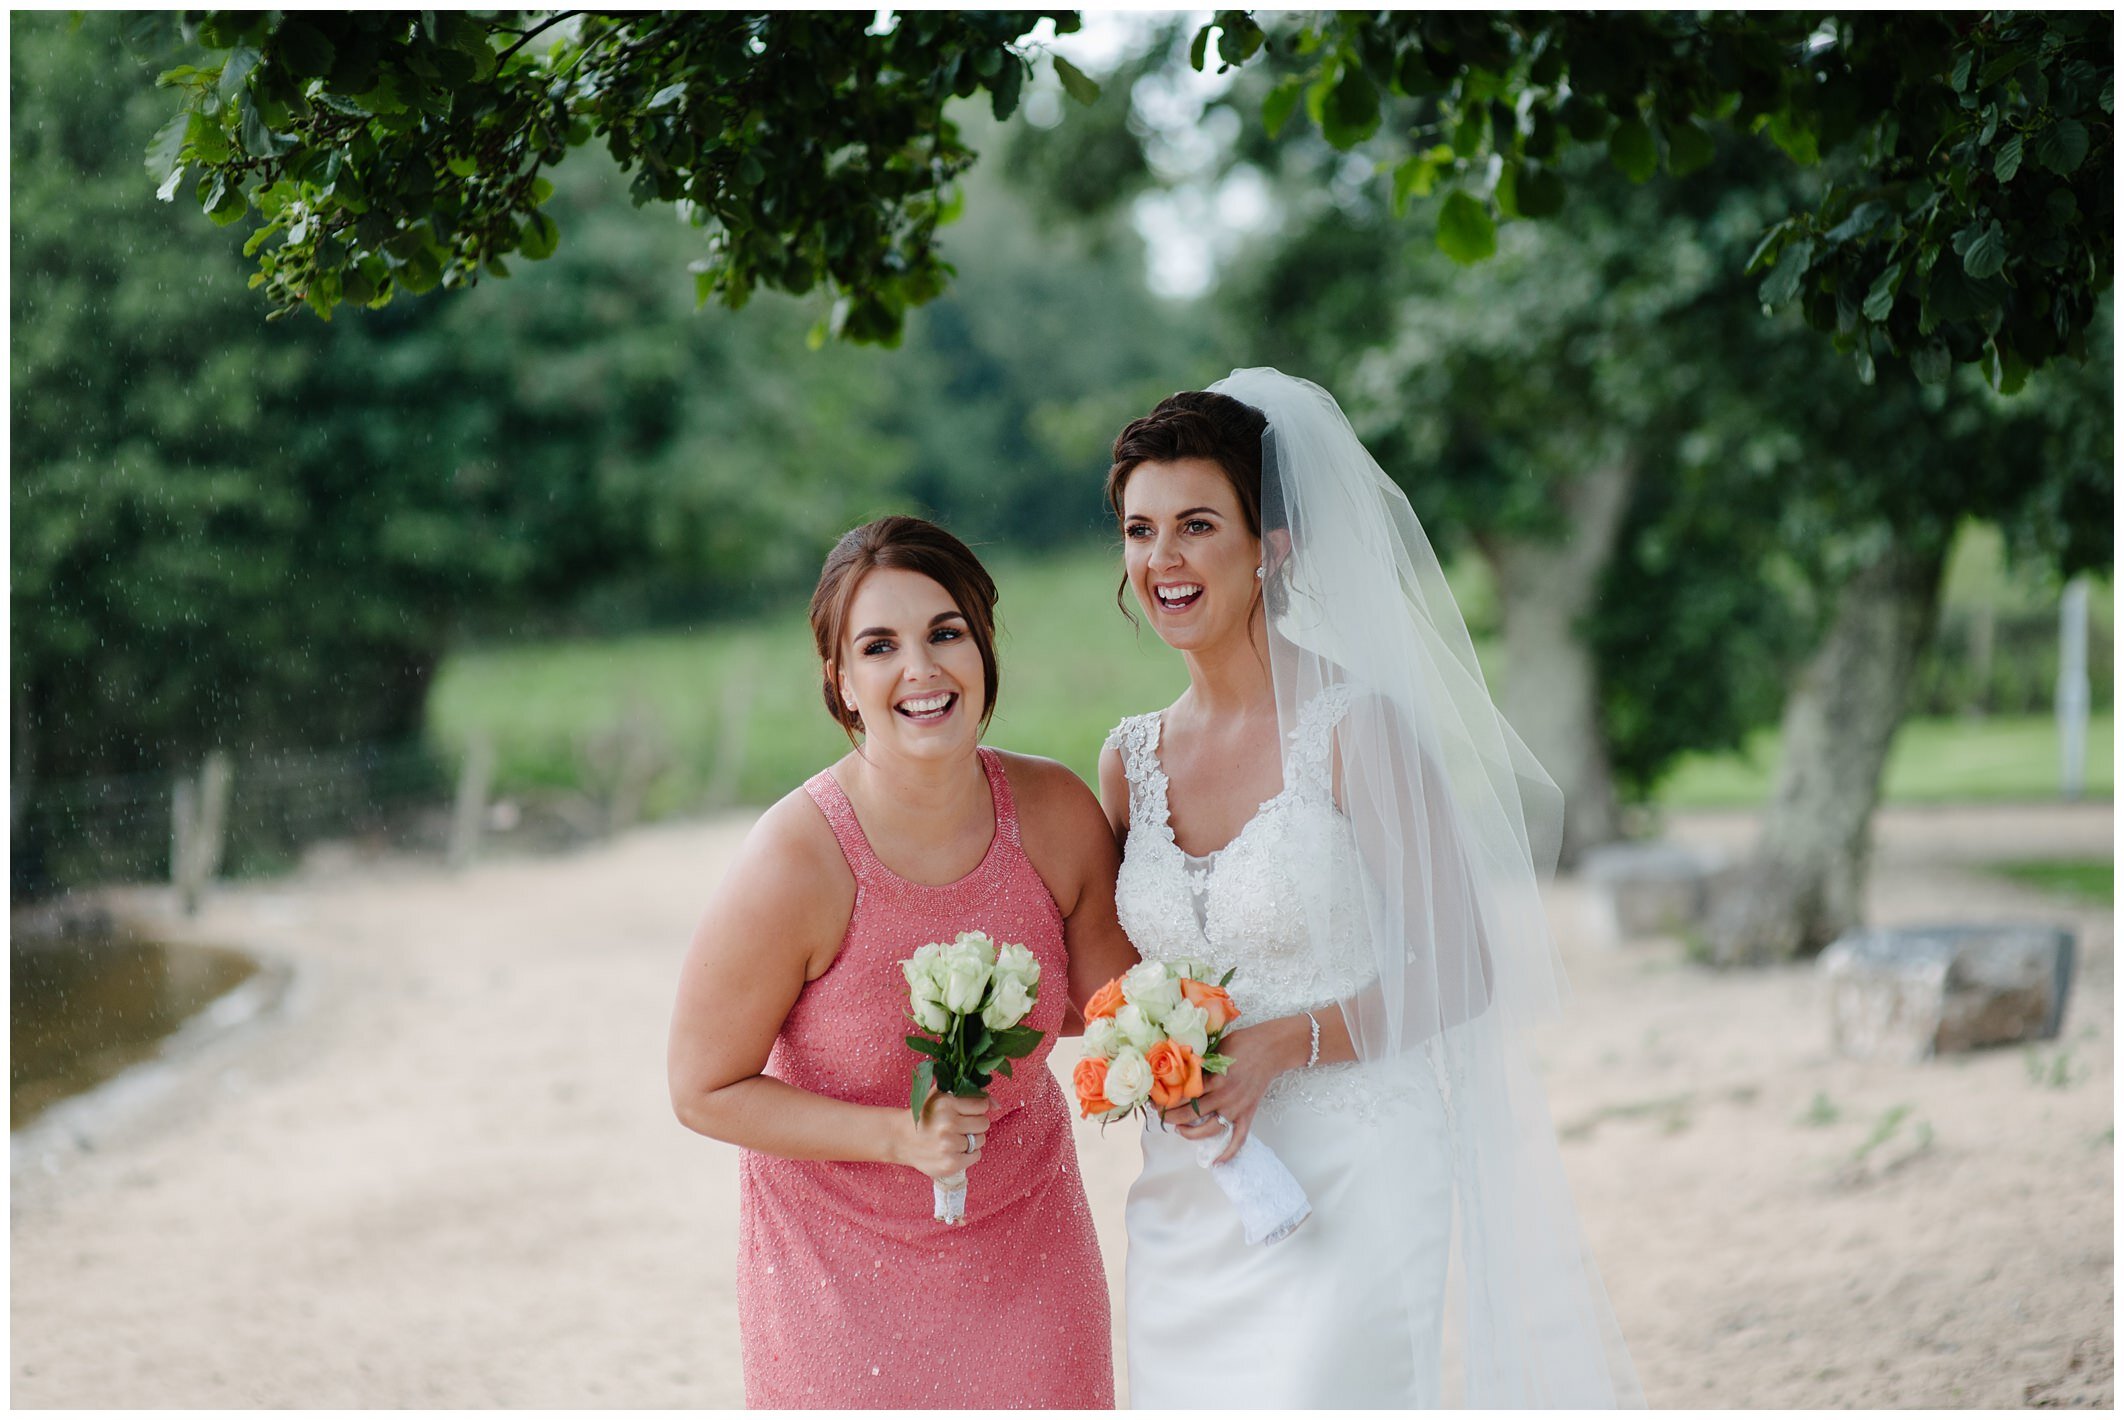 Lynsey_Andy_Rossharbour_Fermanagh_wedding_jude_browne_photography_0121.jpg